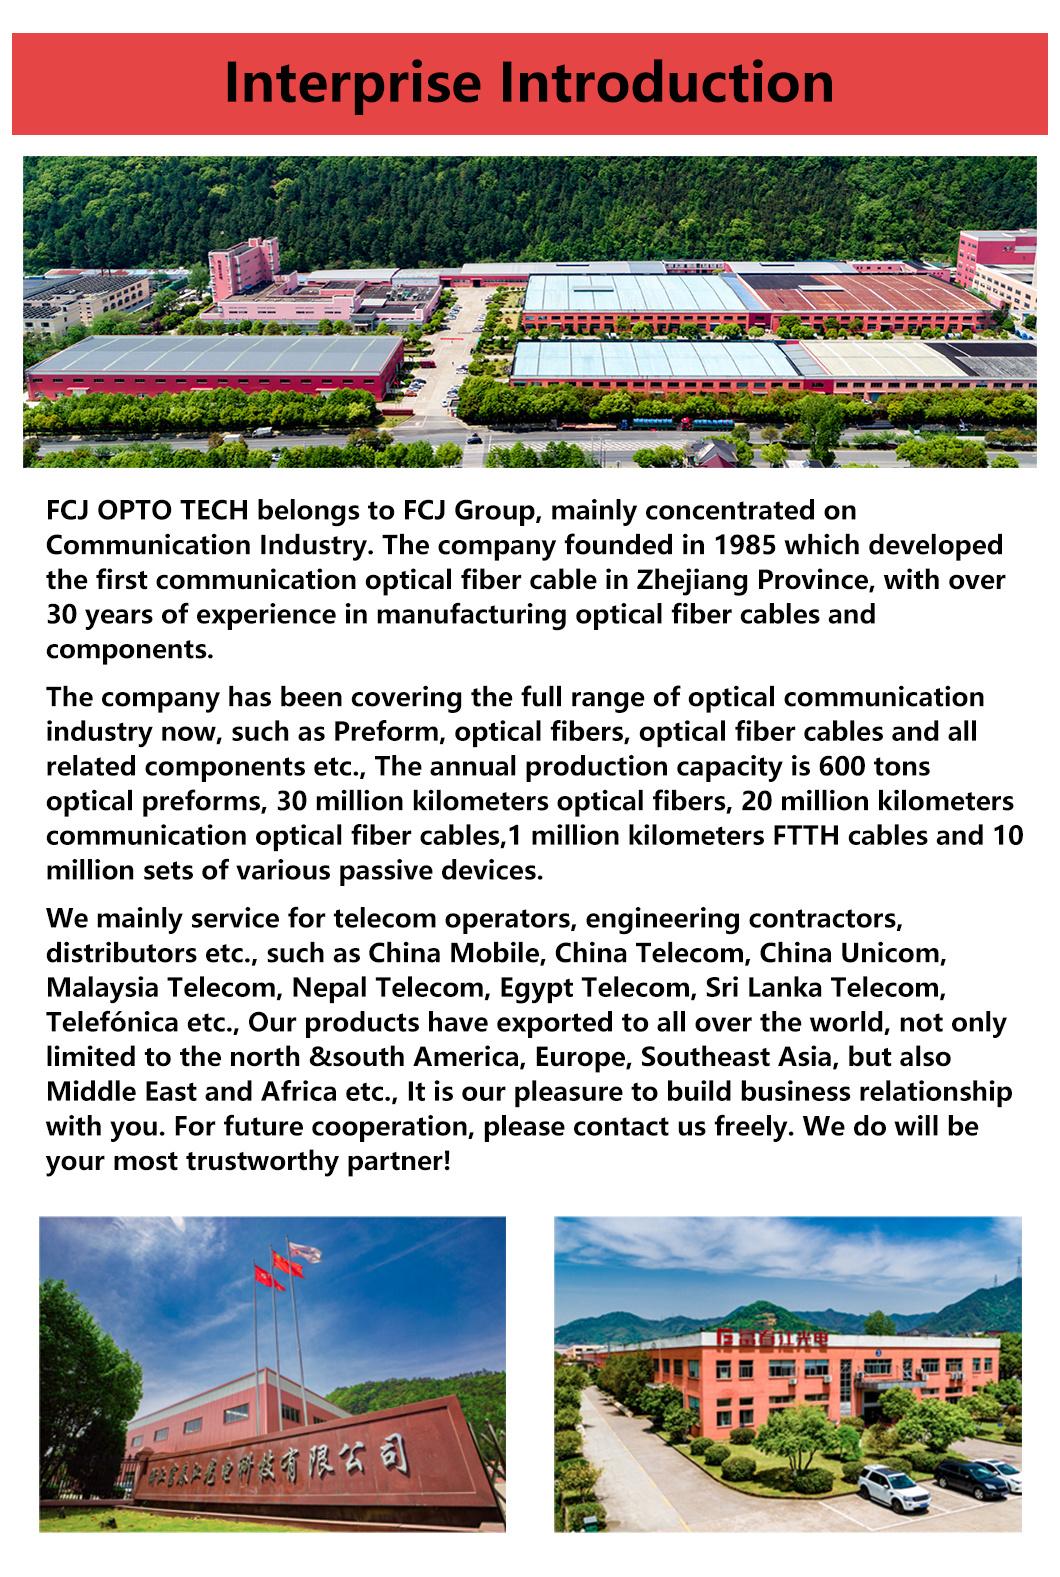 Hot Sale Low Cost Factory Price All Dielectric 1/2/4 Cores Fibers Drop FTTH Fiber Optic Cable (GJYXFCH) FRP